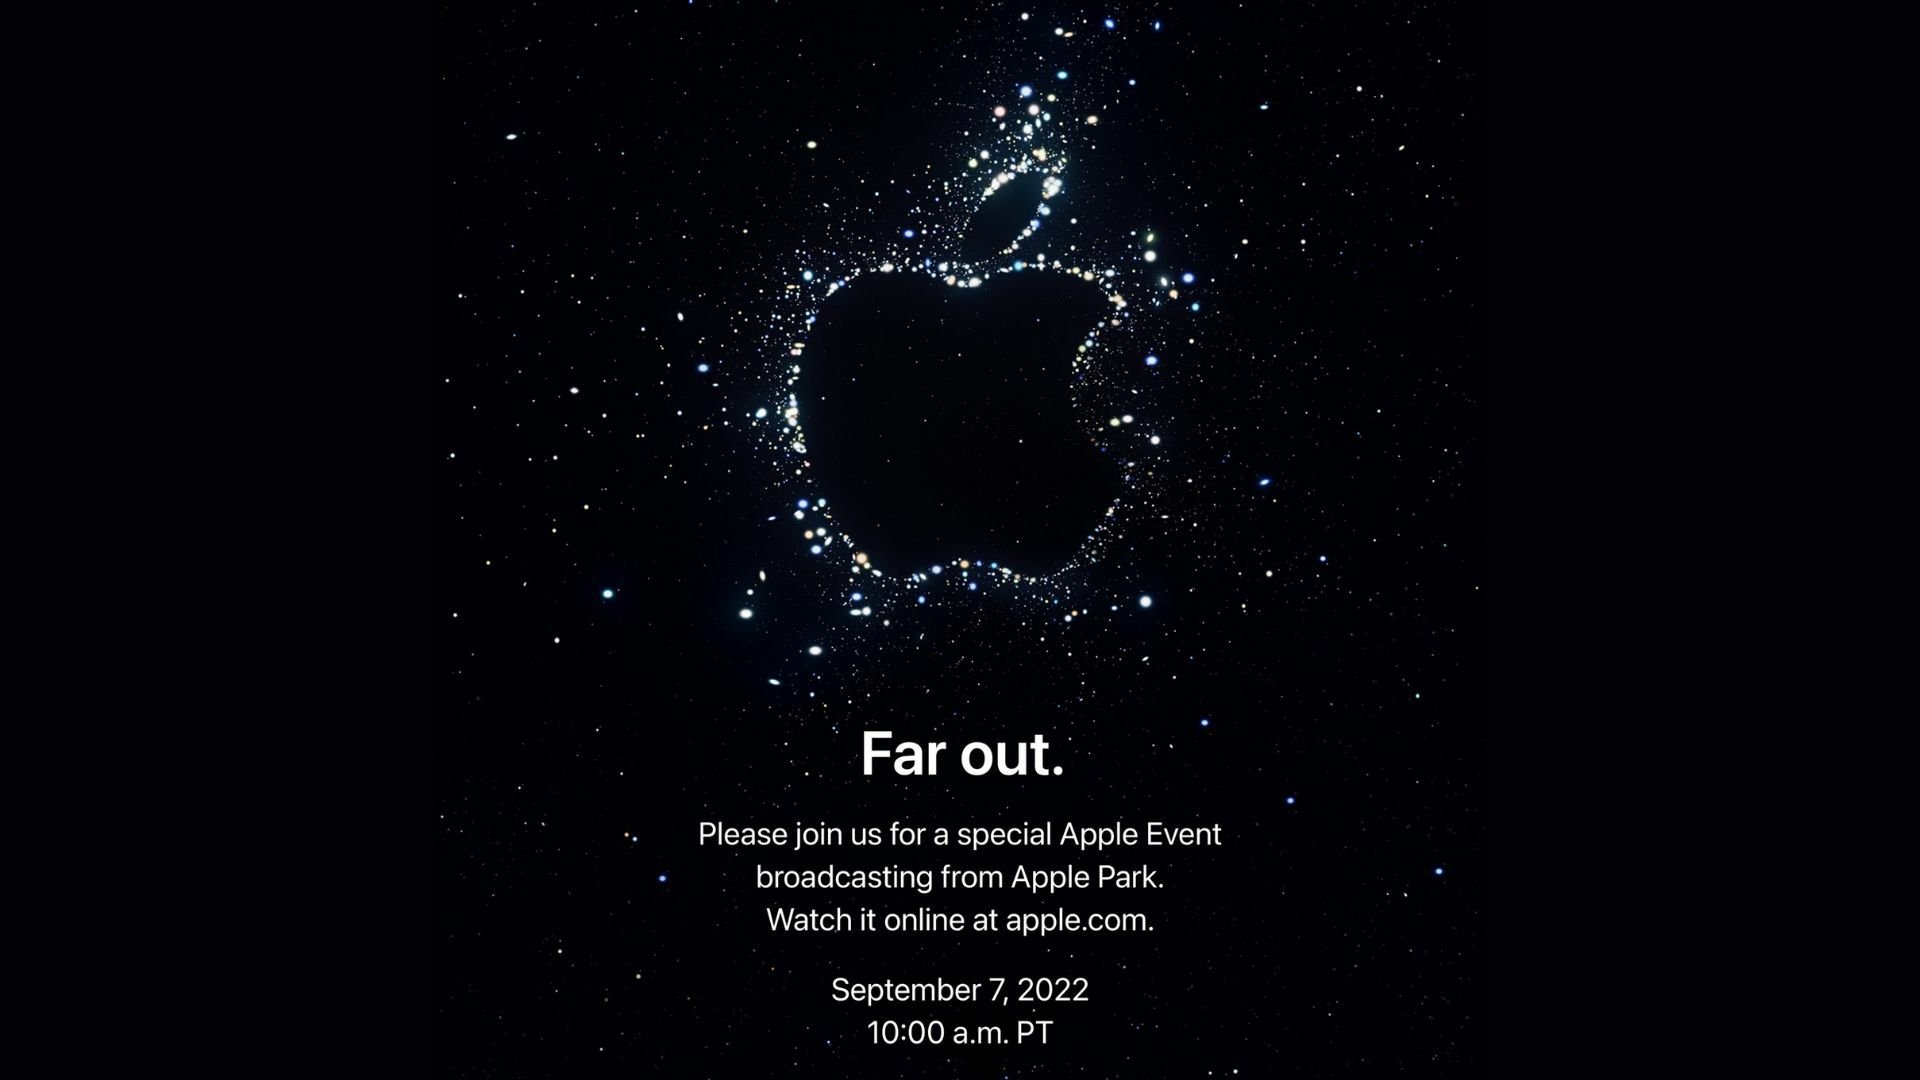 Apple’s next iPhone event is set for Sept. 7